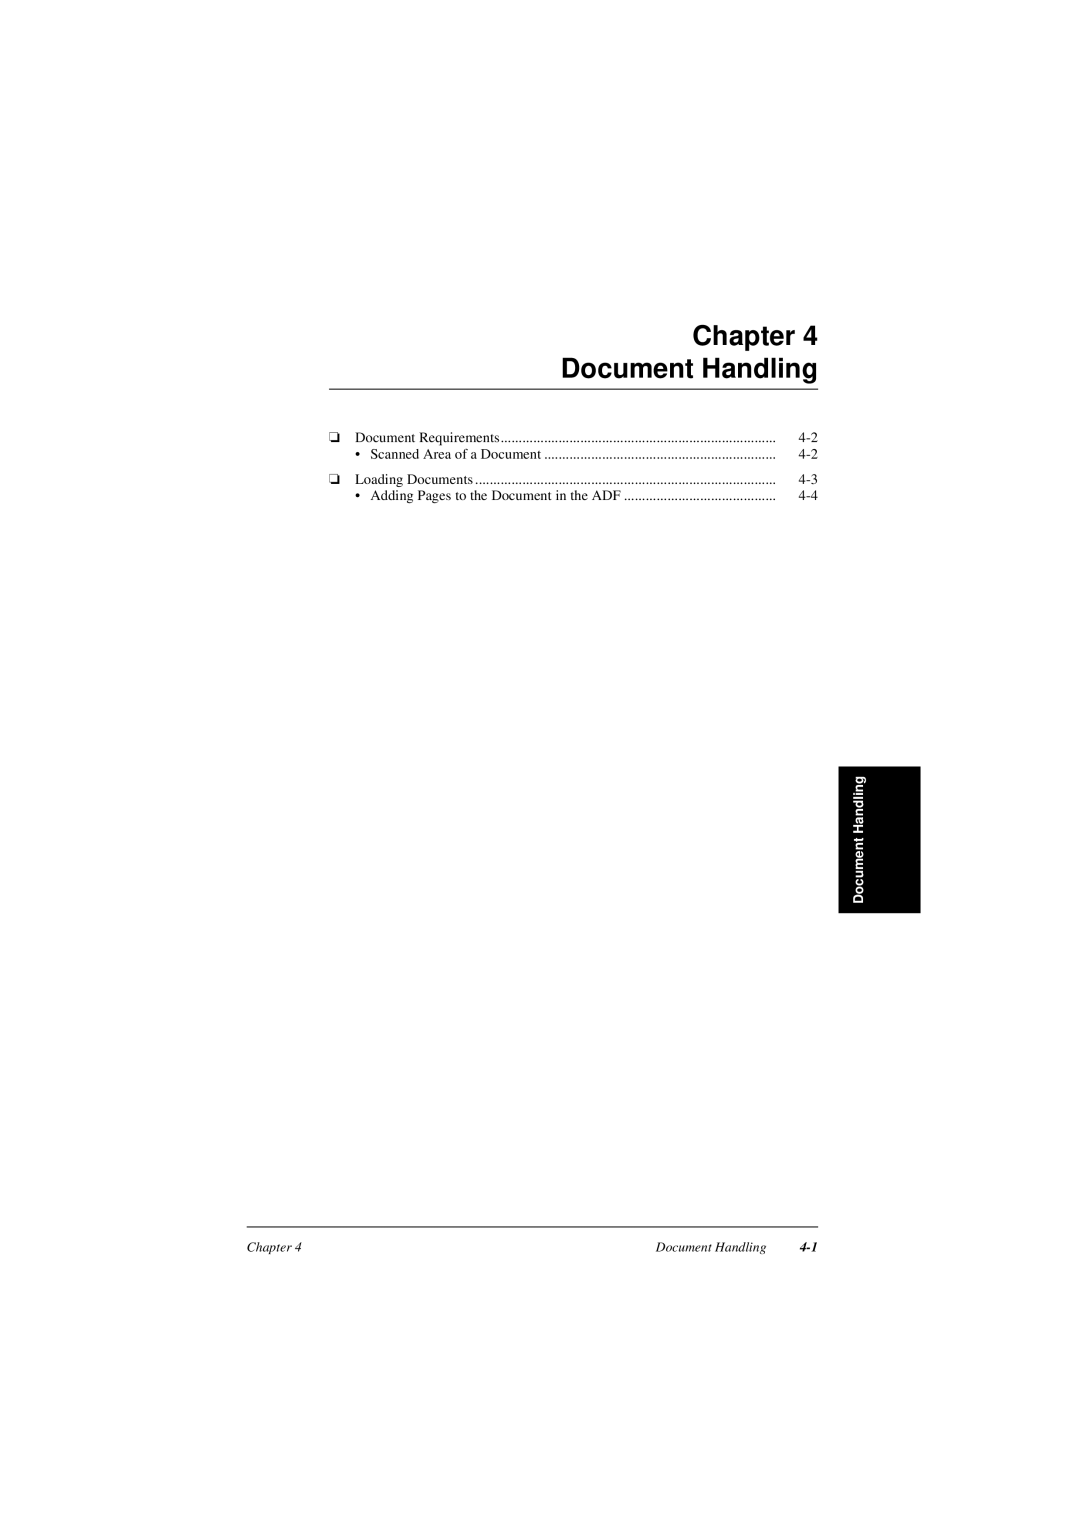 Canon L240, L290 manual Chapter Document Handling 